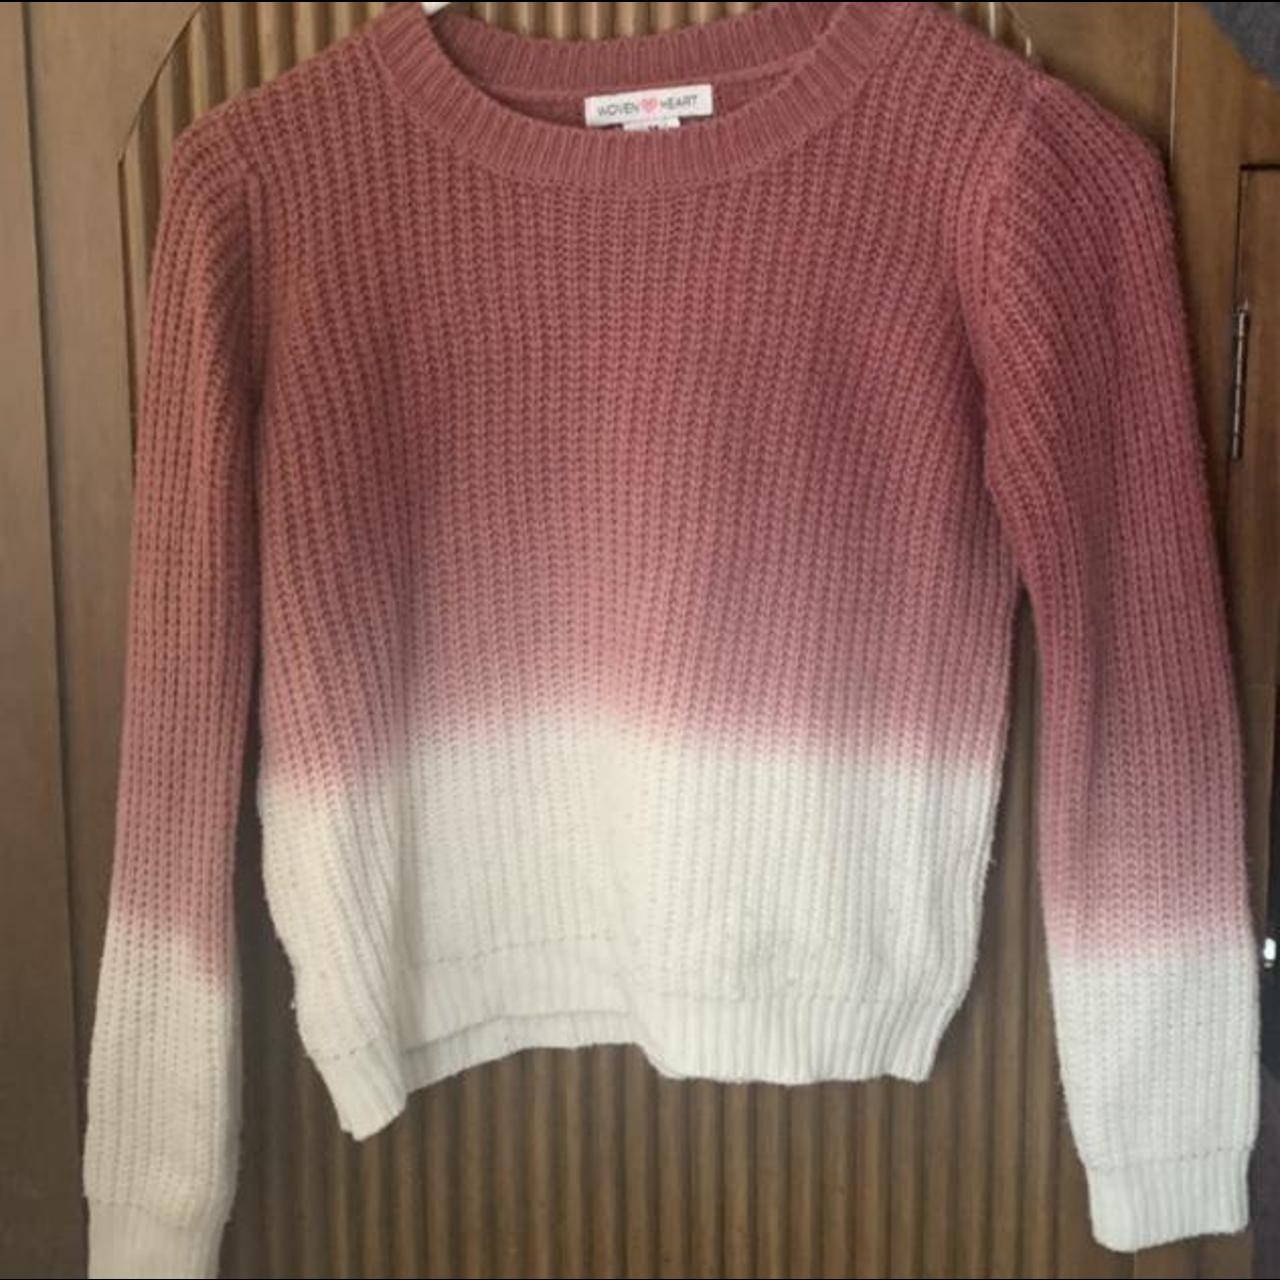 Product Image 1 - Woven Heart Ombre Sweater <3

-Fits